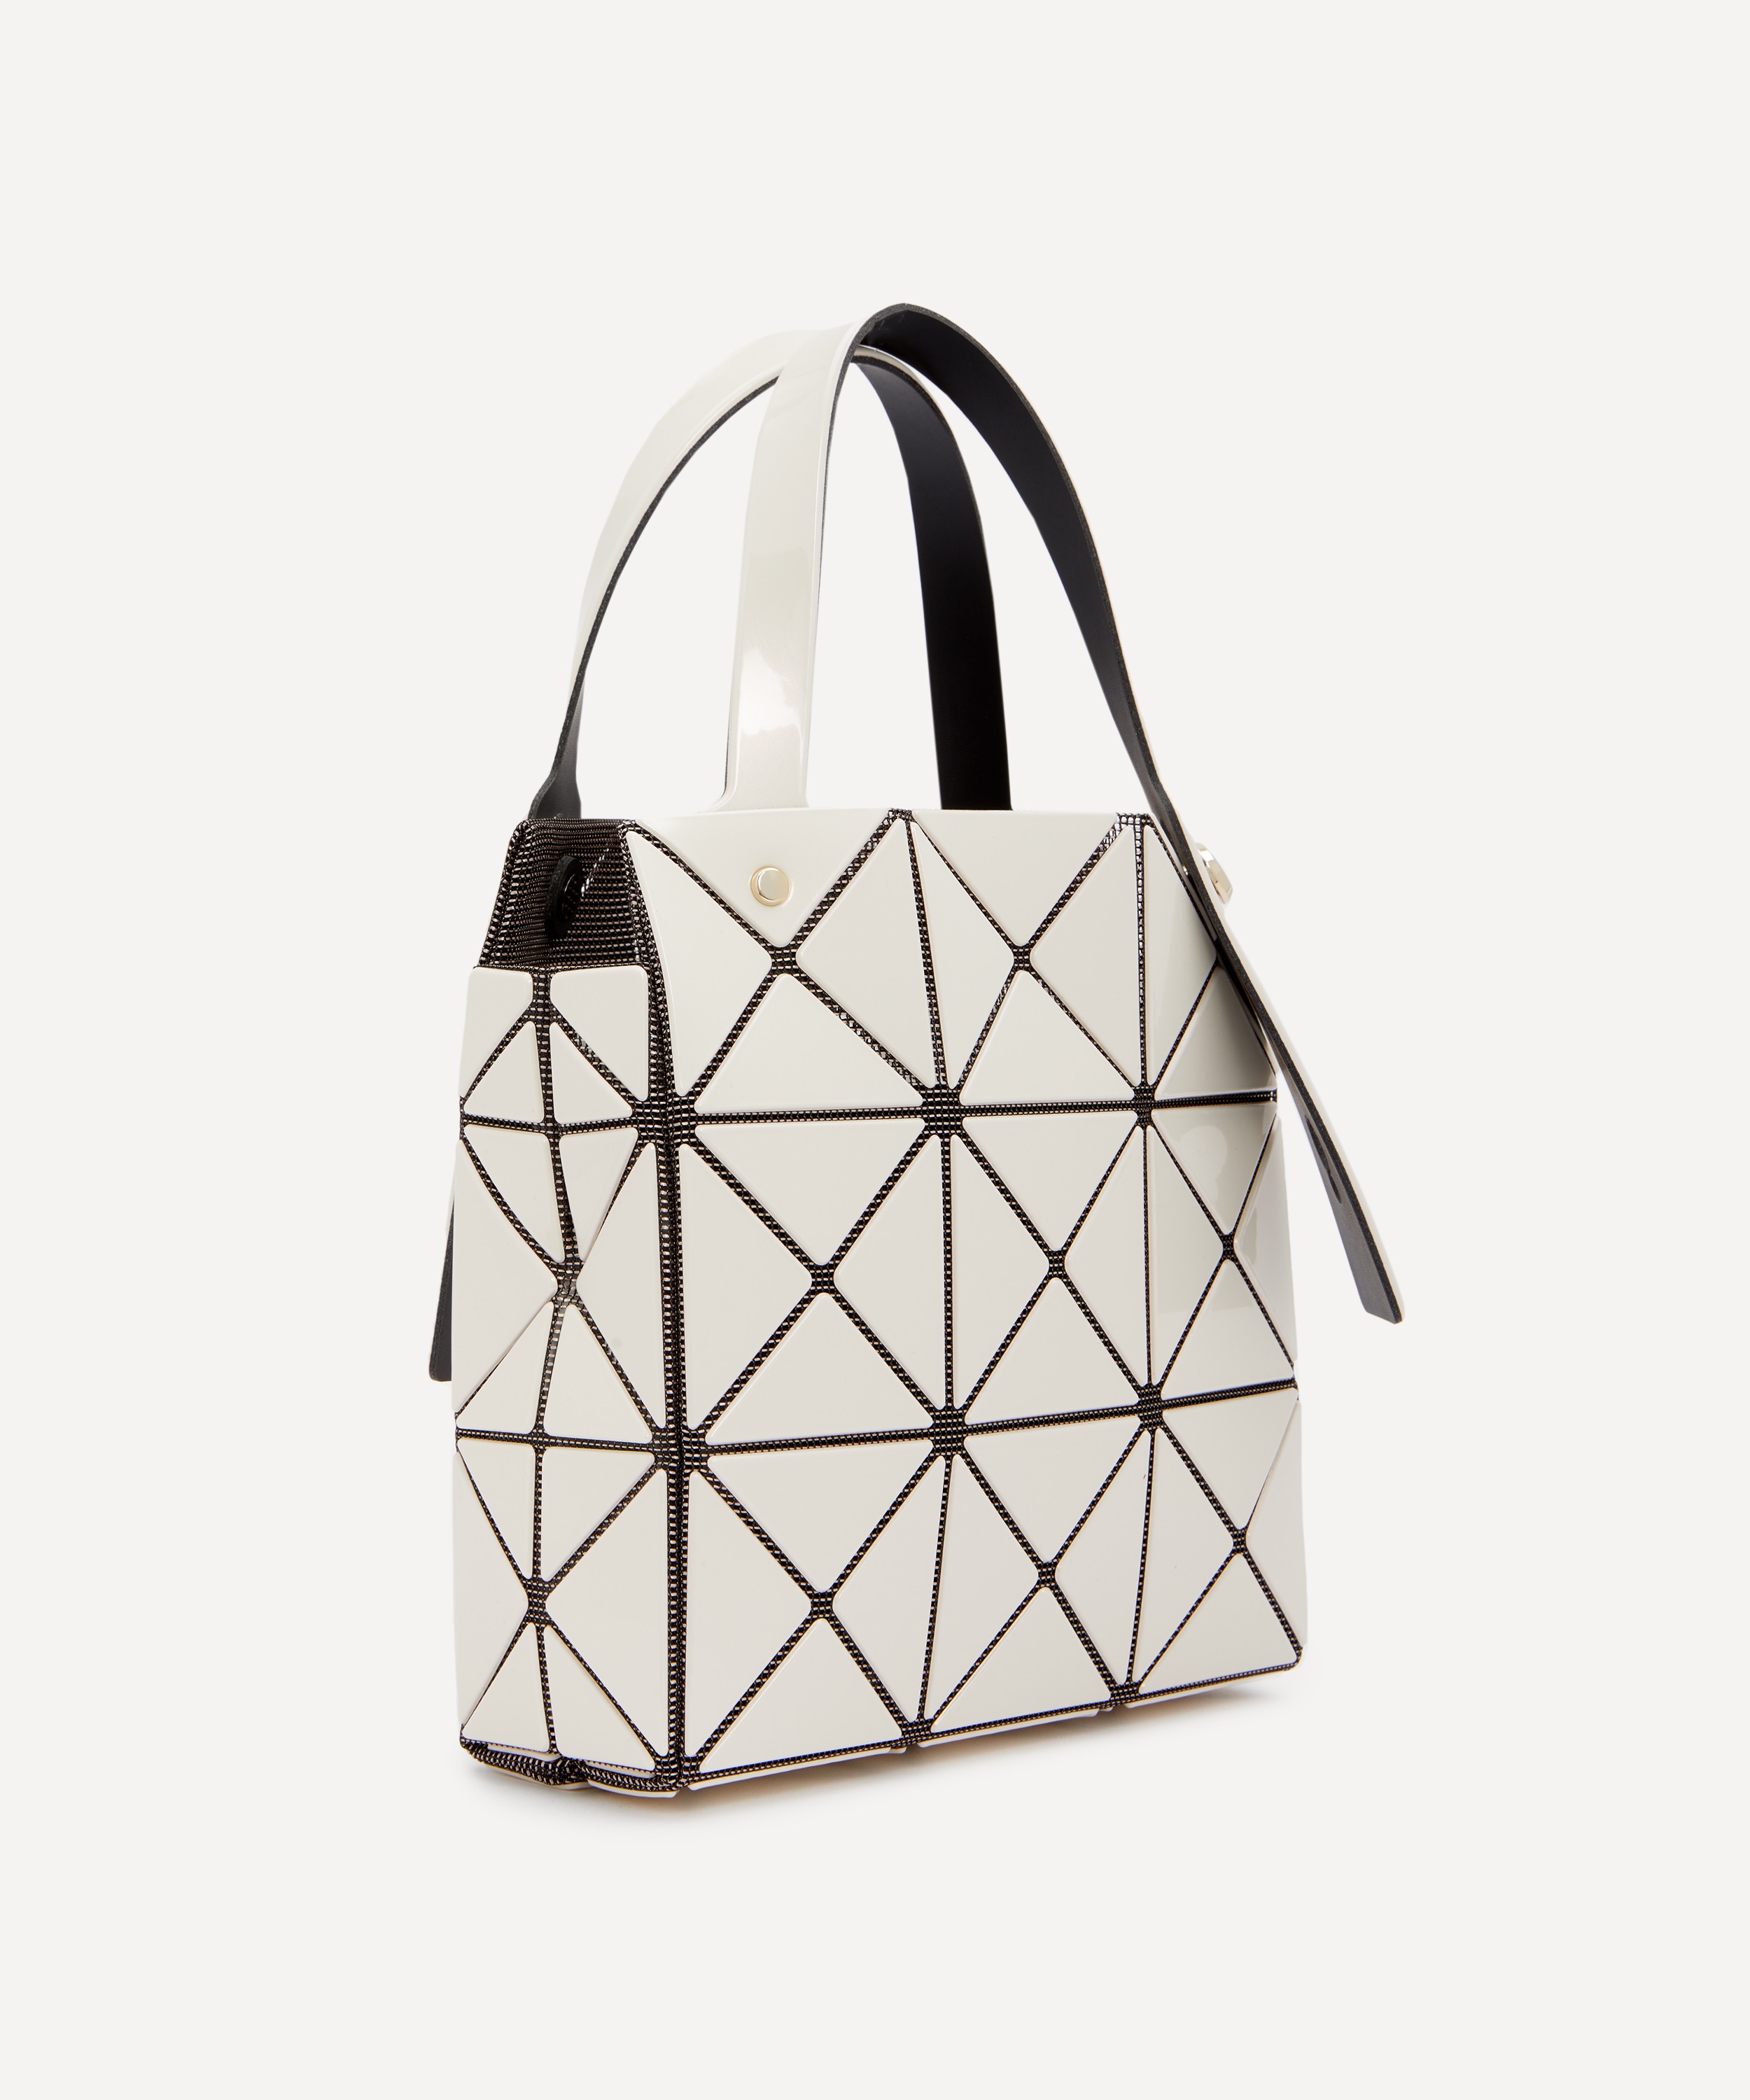 Outfit ideas - How to wear BAO BAO ISSEY MIYAKE (United States) - WEAR